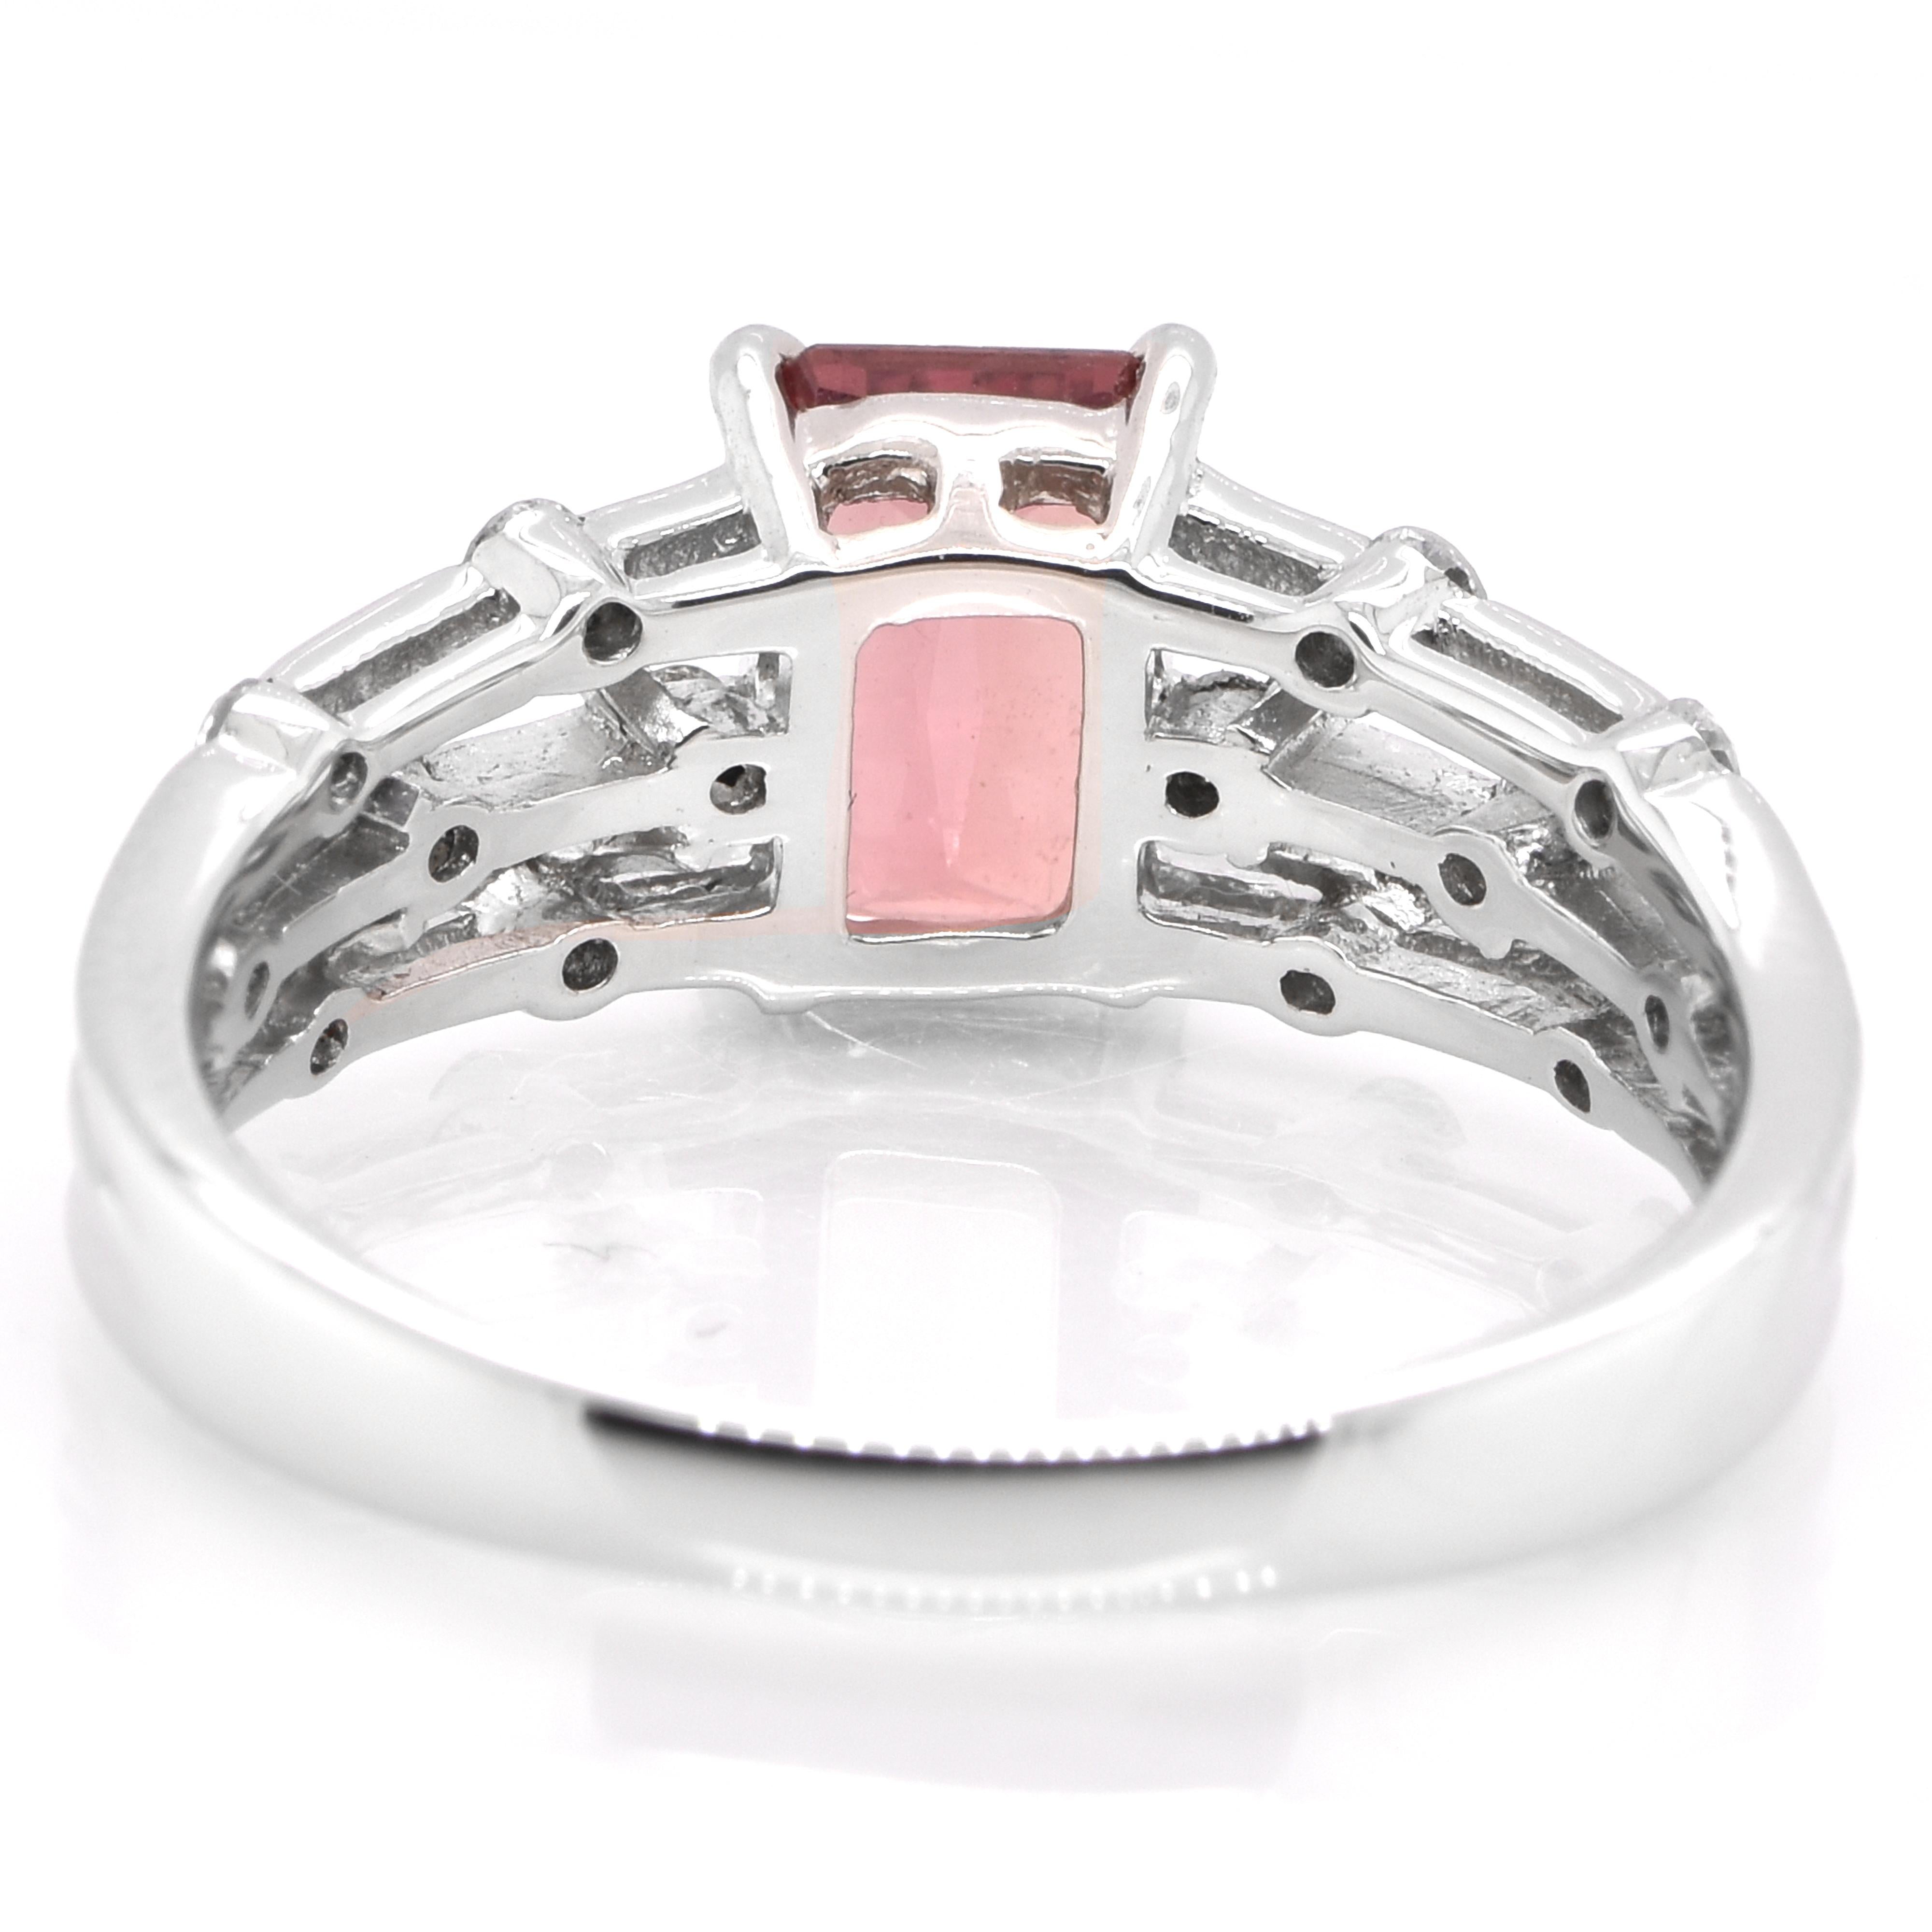 Women's 1.35 Carat Natural Padparadscha Sapphire and Diamond Ring Set in Platinum For Sale